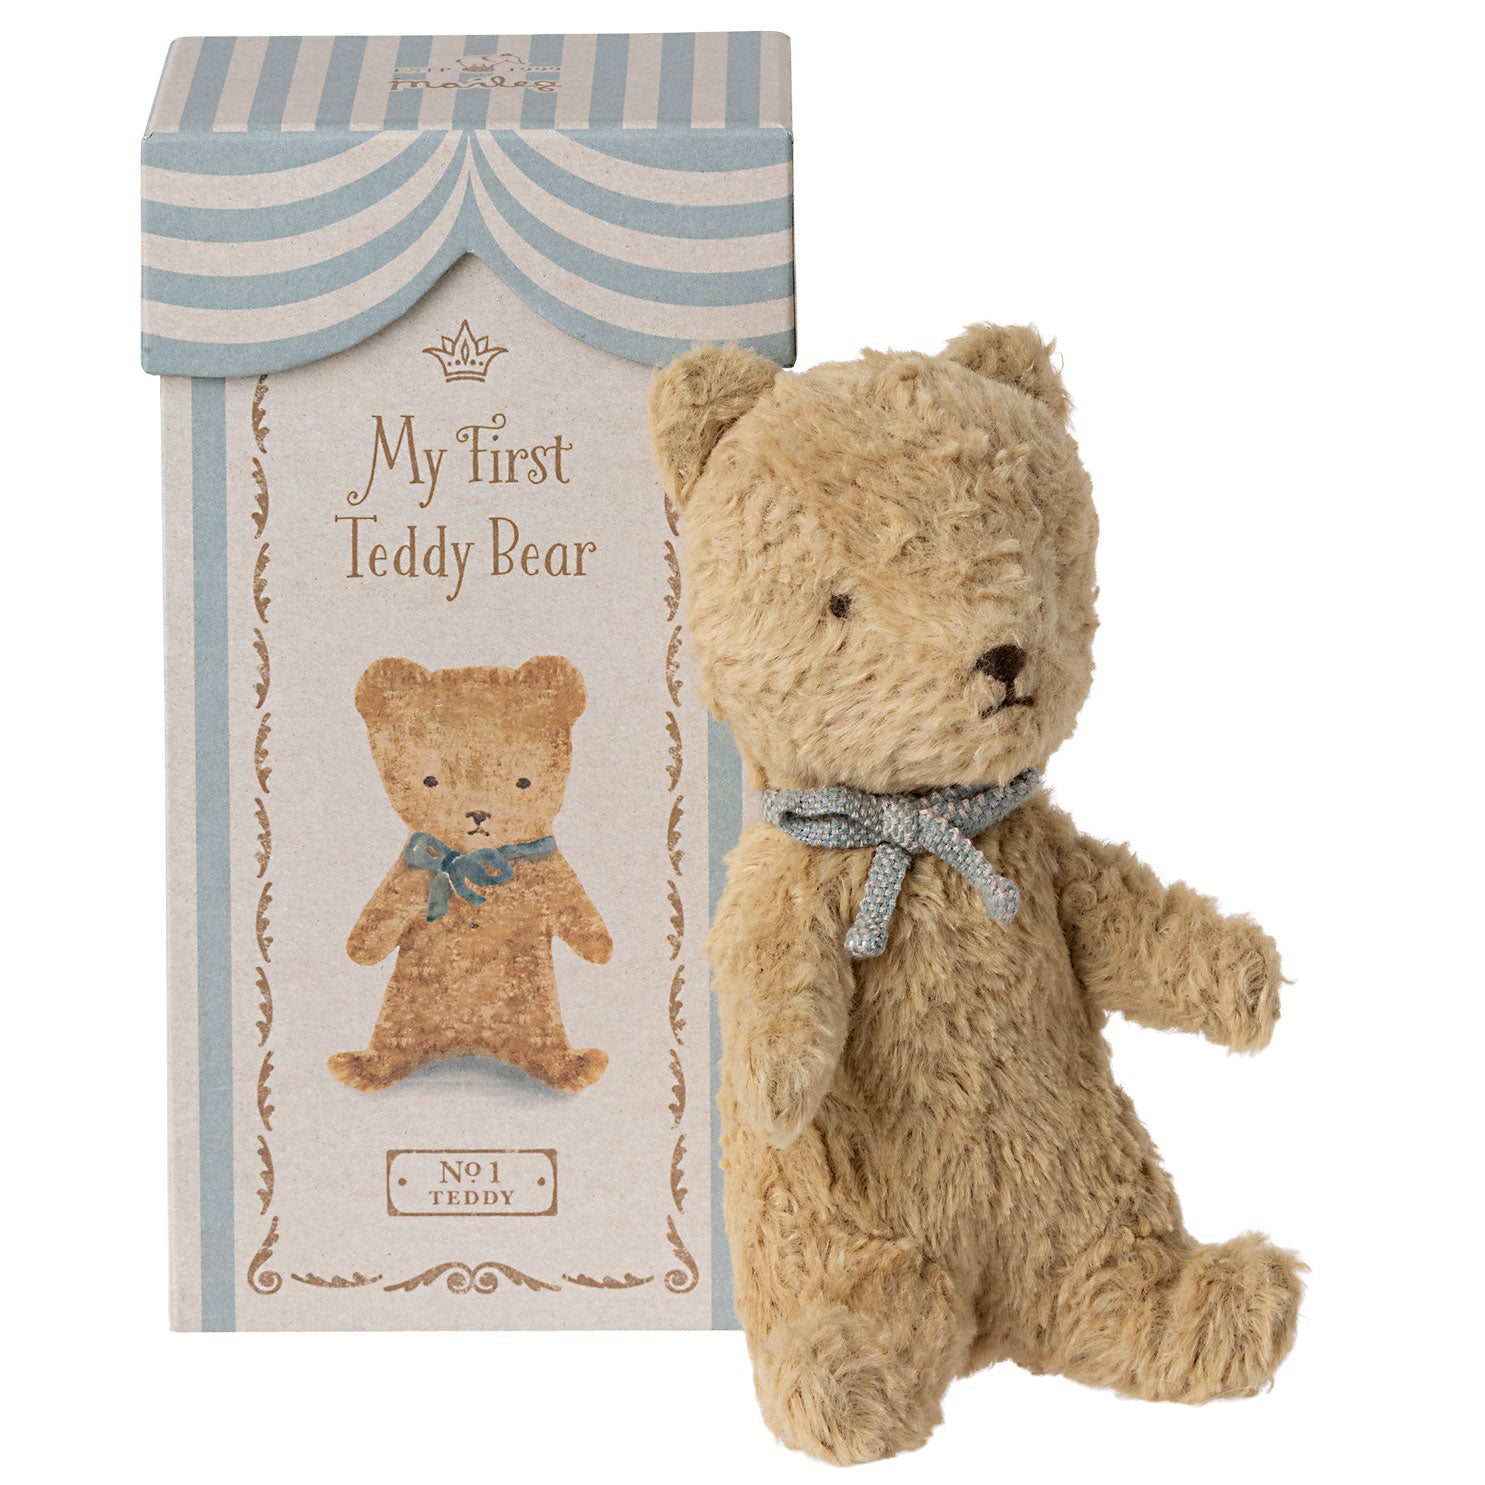 Maileg collectible My First Teddy Bear in Sand Colour available at Bonjour Baby Baskets